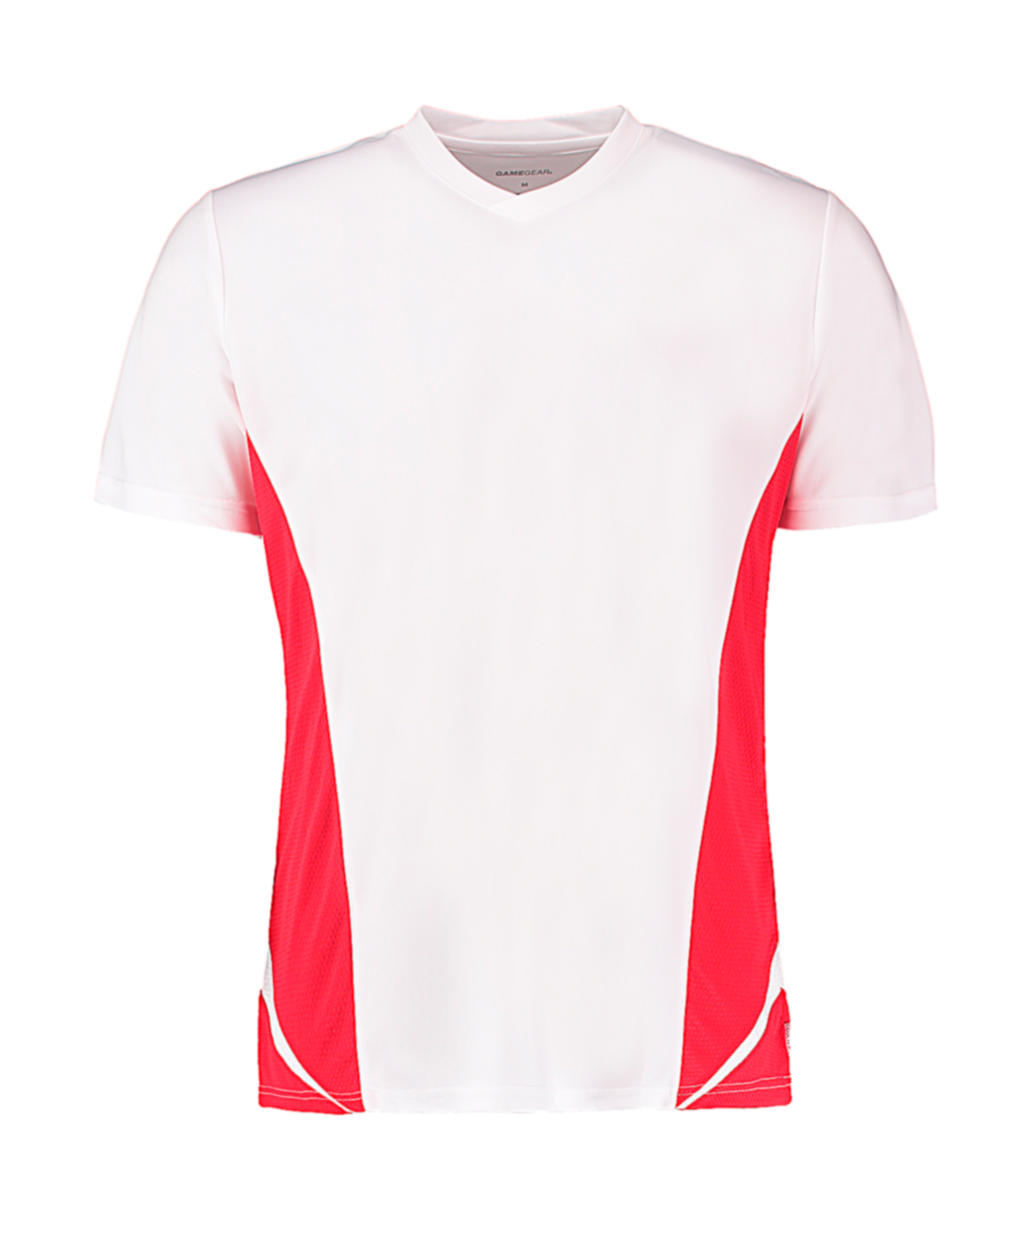 076.11 / Regular Fit Cooltex® Panel V Neck Tee / White/Red